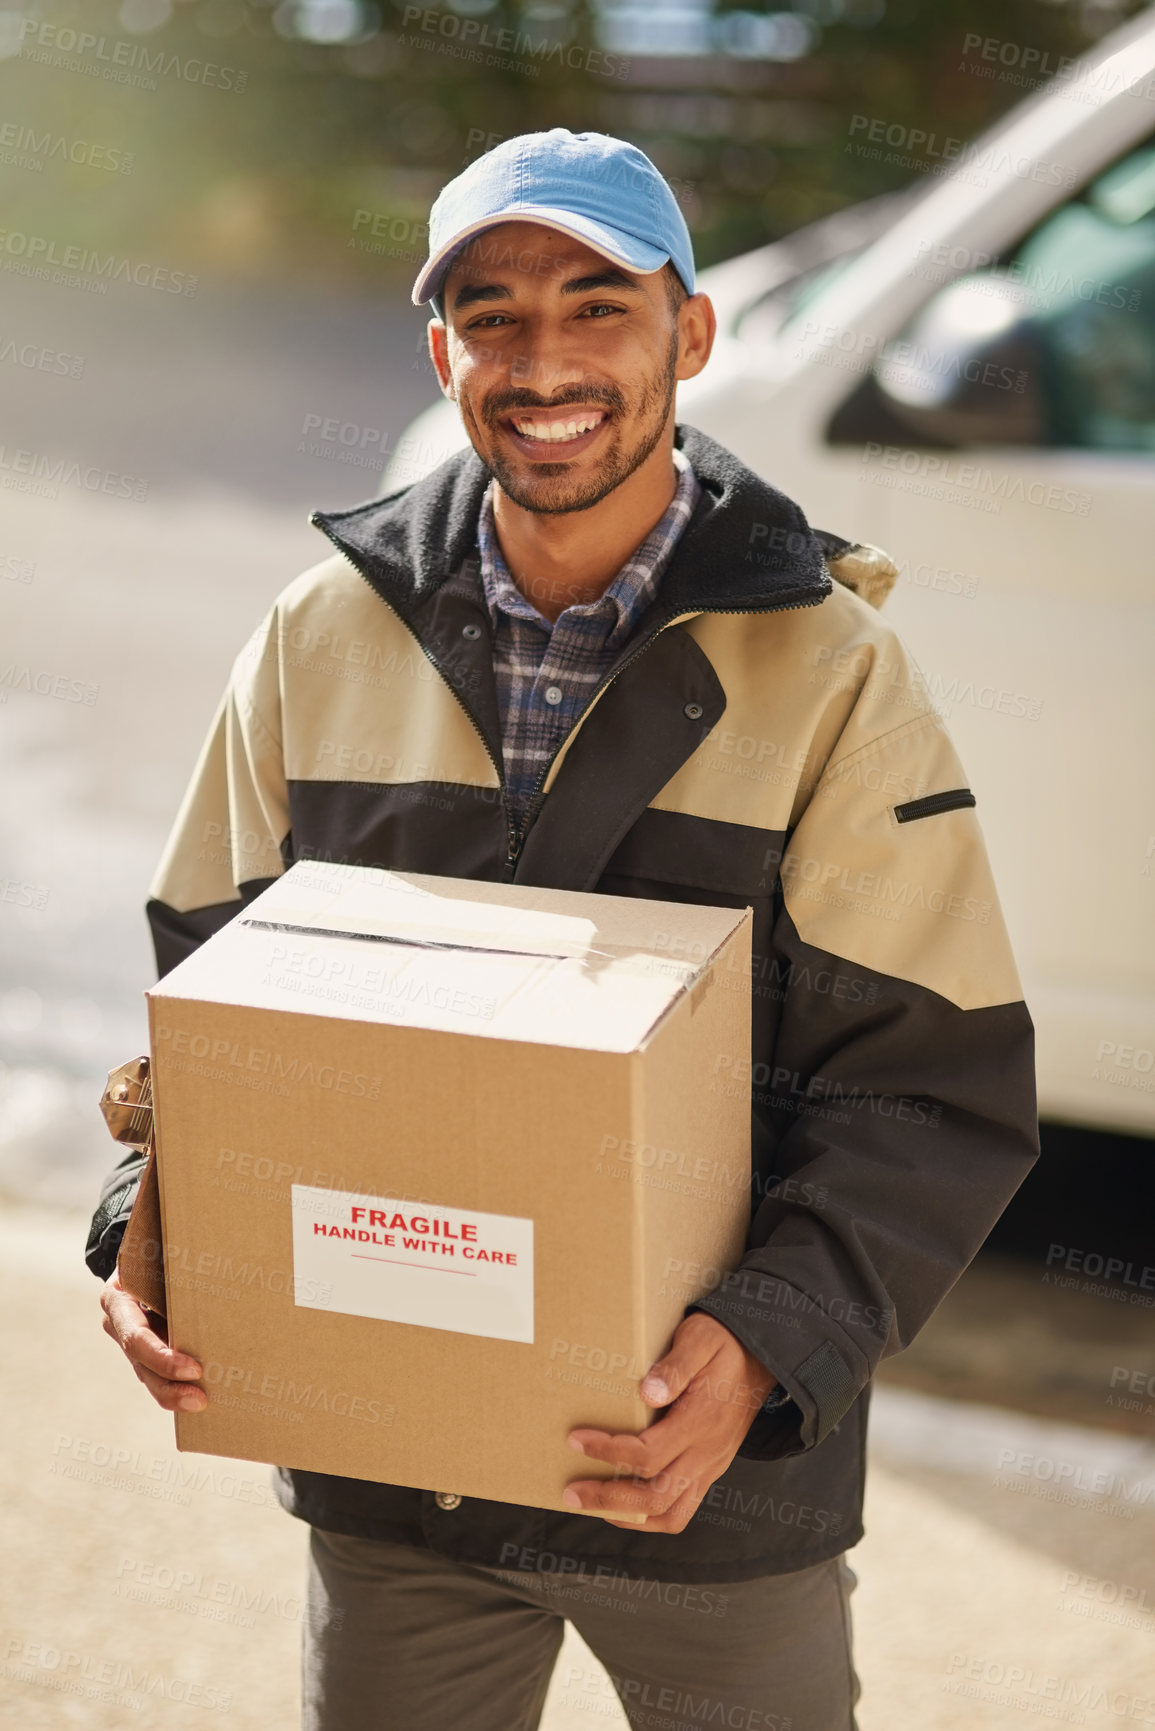 Buy stock photo Shot of a delivery man loading boxes into a vehicle